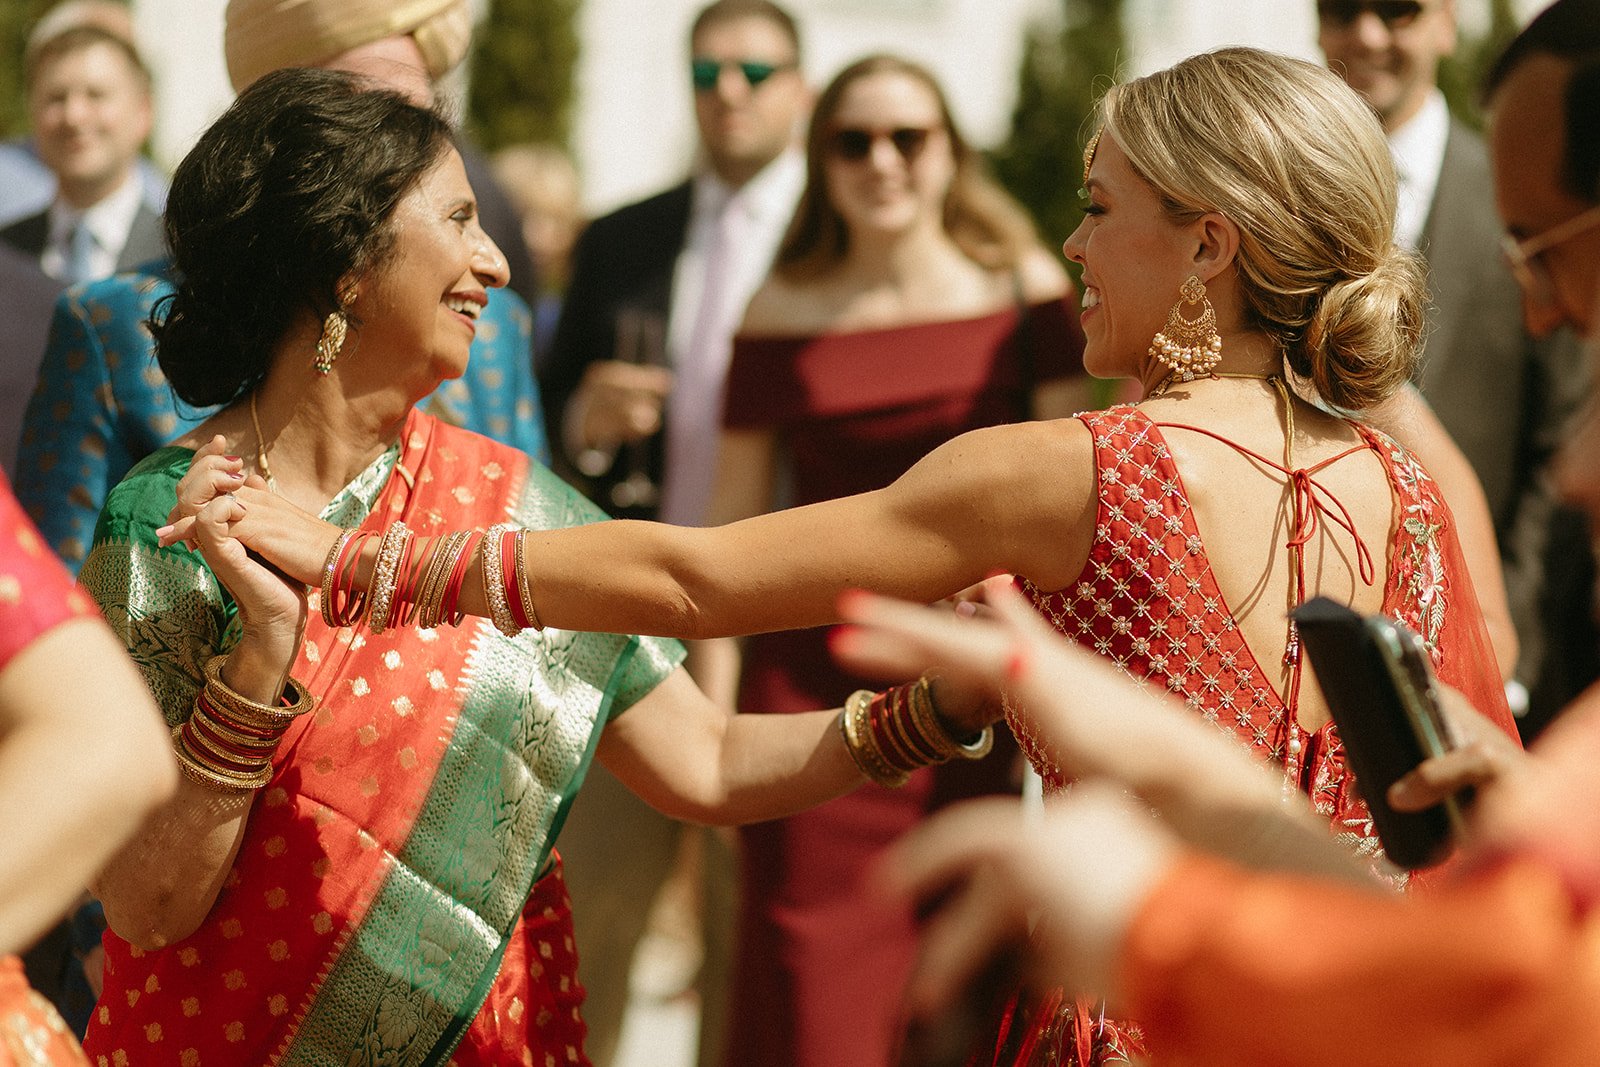 Beautiful Bride dancing with mother in law during reception